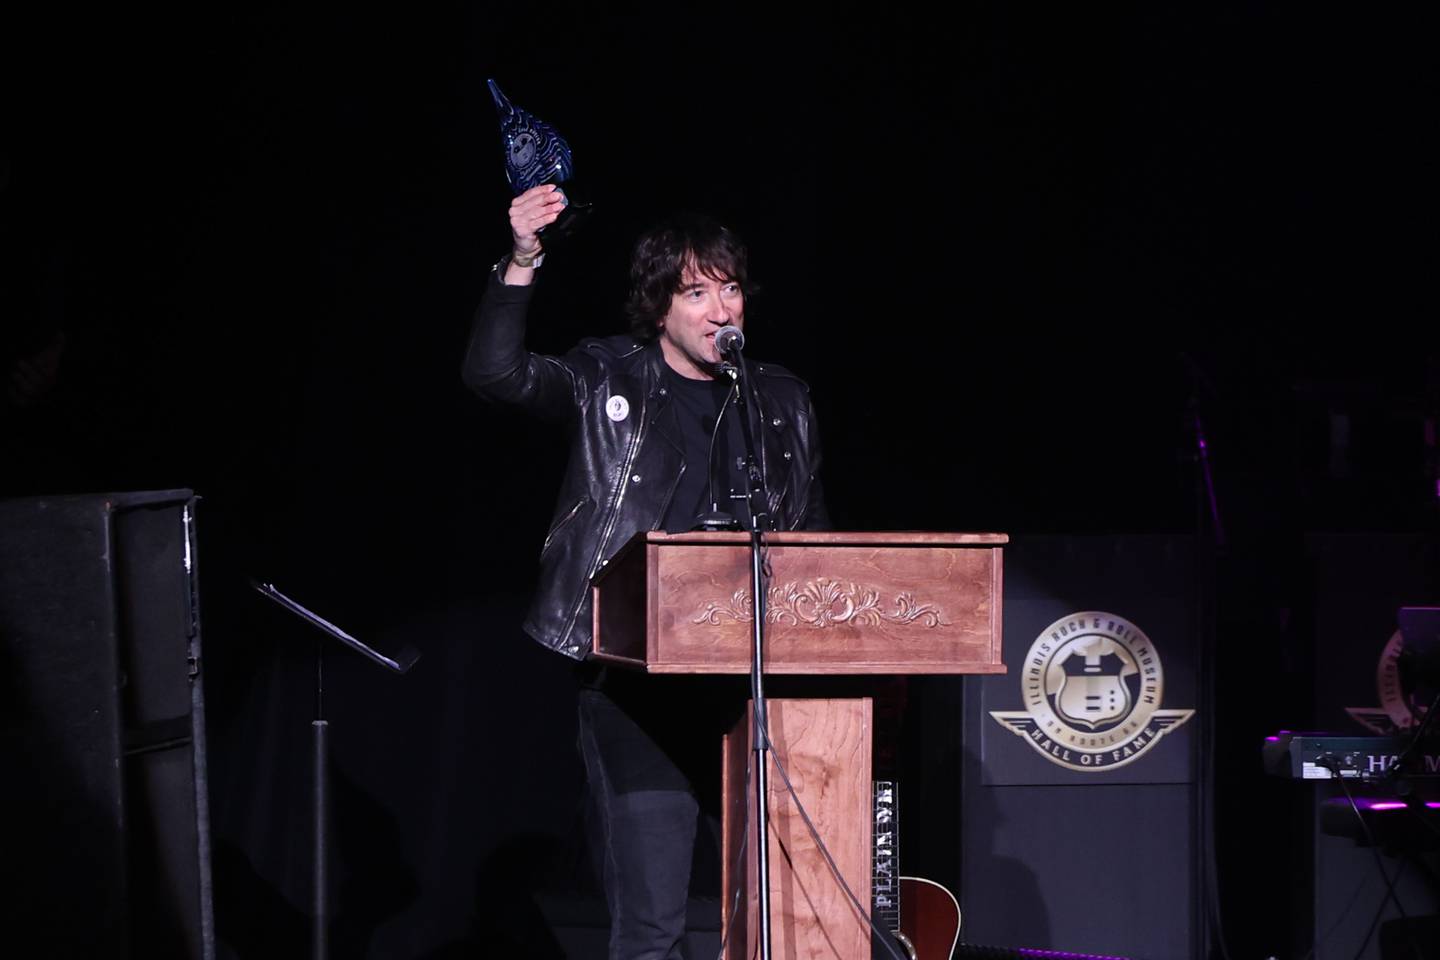 Tom Higgenson, lead singer of The Plain White T’s and Villa Park native, accepts his Hall of Fame award at the 3rd Annual Illinois Rock & Roll Museum Hall of Fame Induction Ceremony on Sunday, Sept. 17, in Joliet.